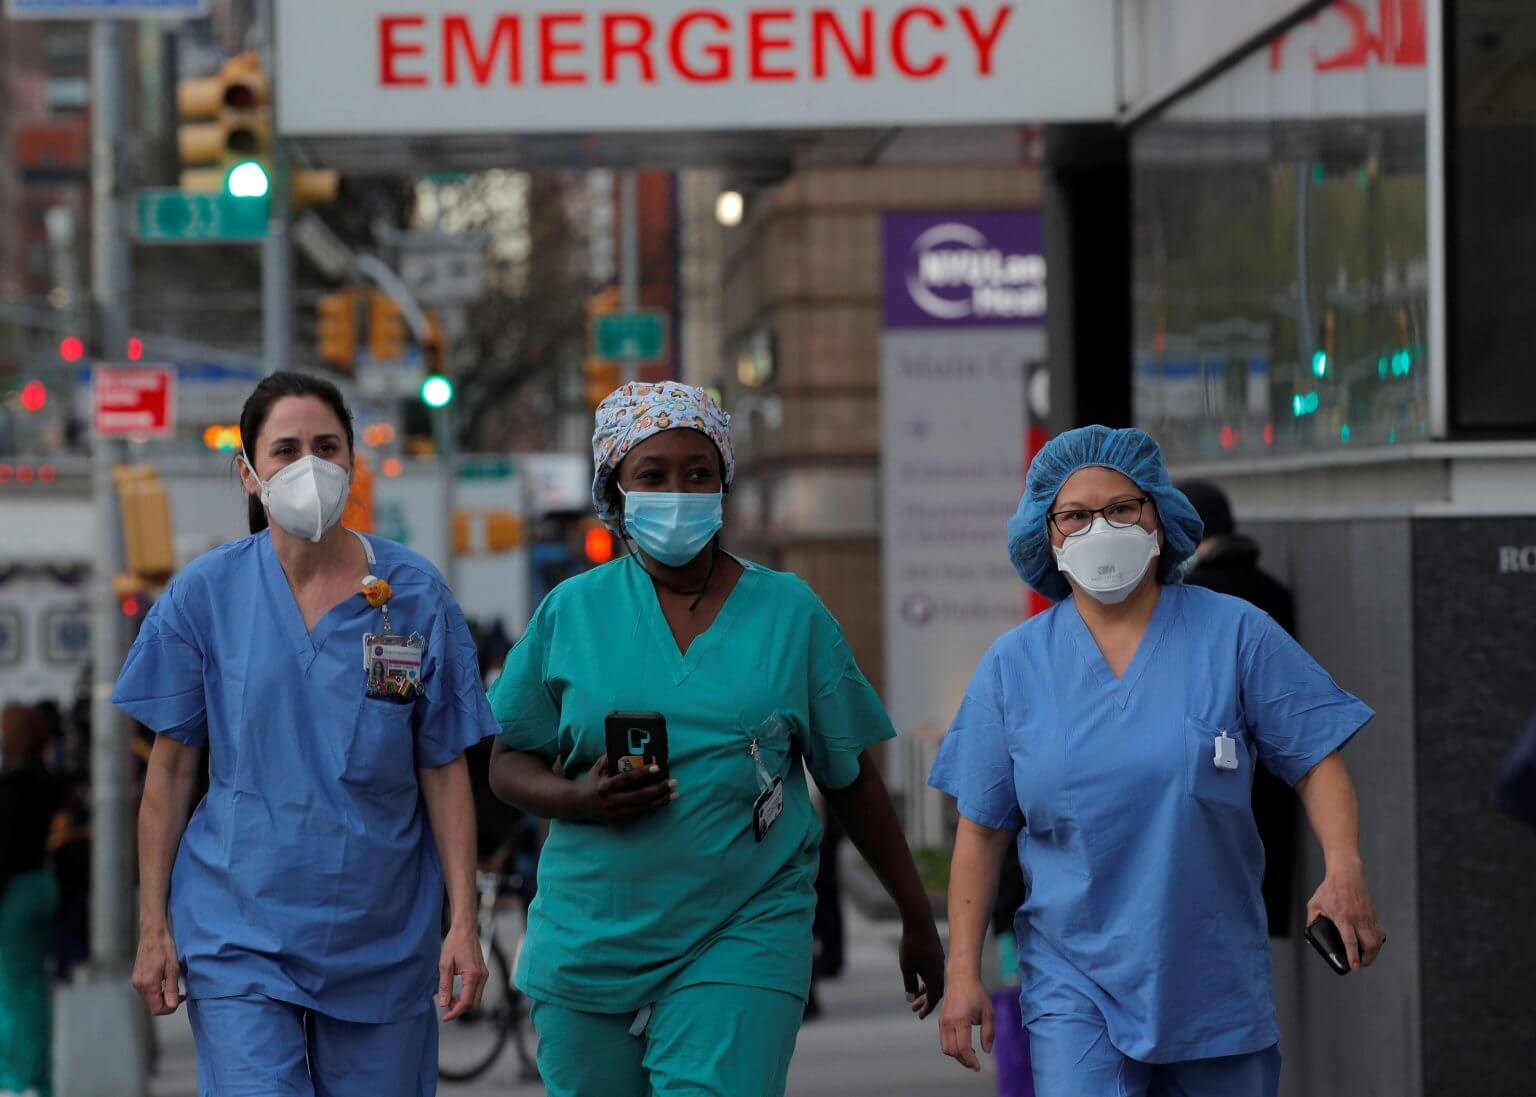 NYC Health + Hospitals launches website chronicling efforts made during